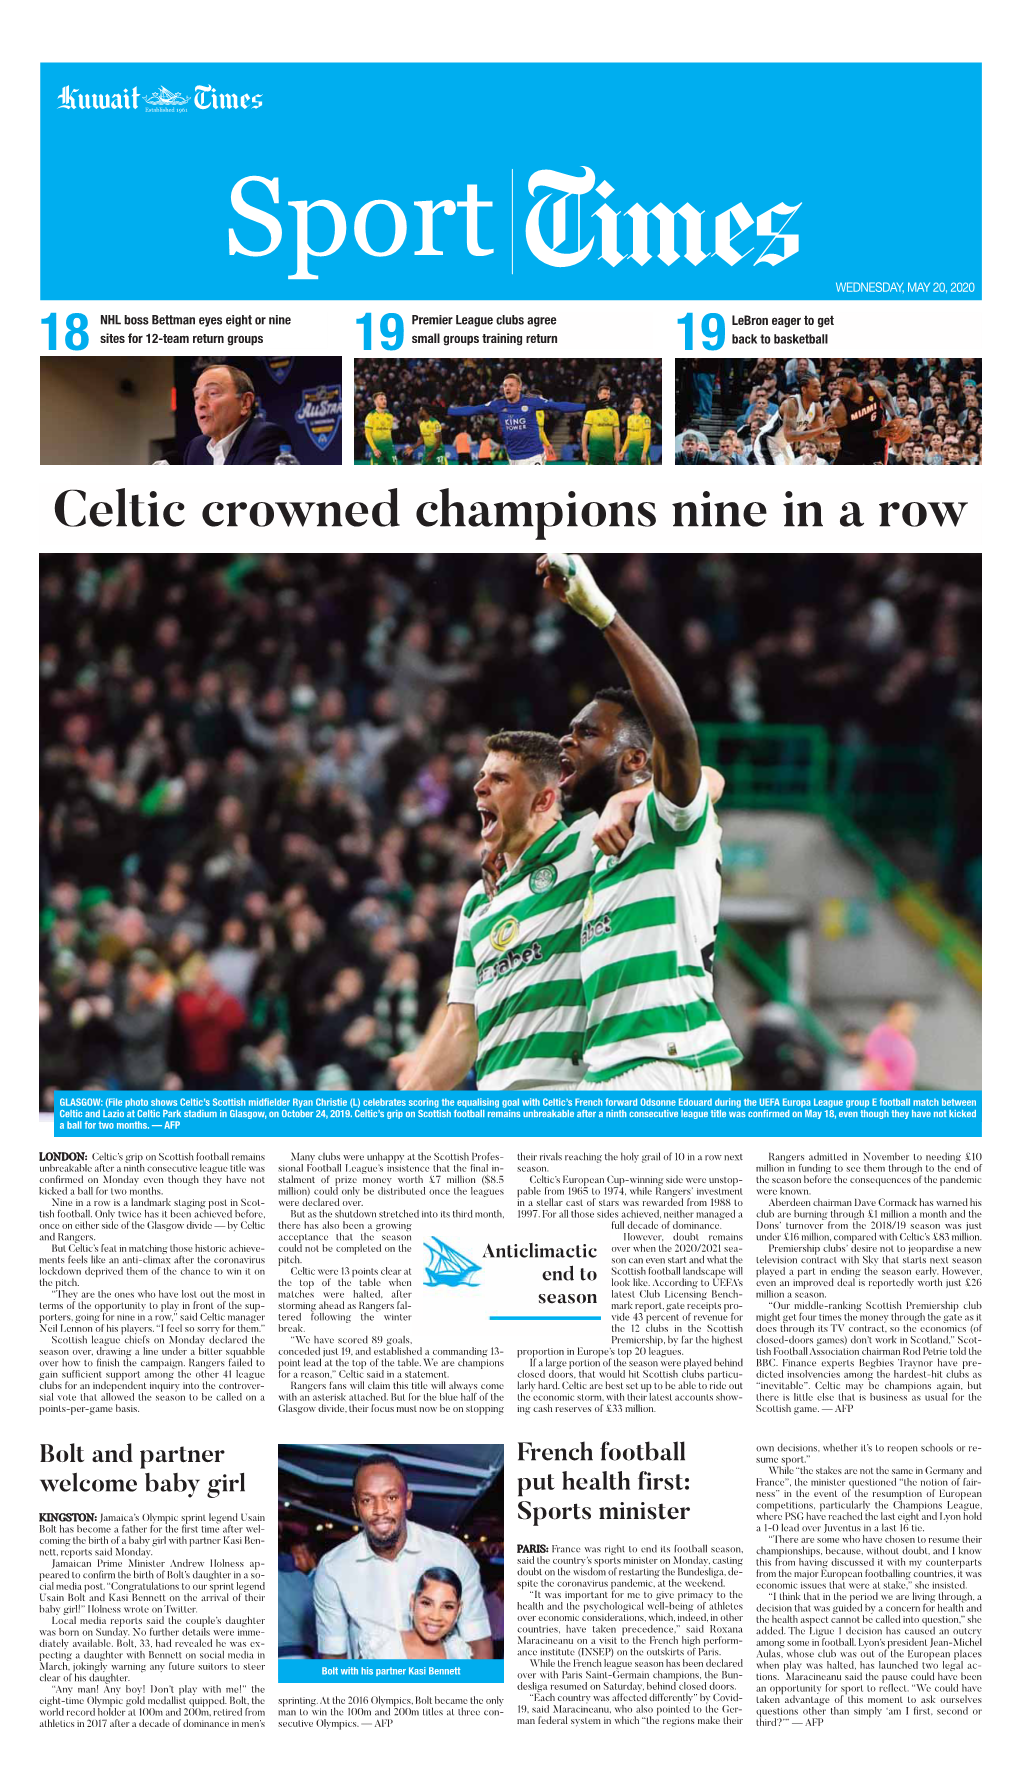 Celtic Crowned Champions Nine in a Row